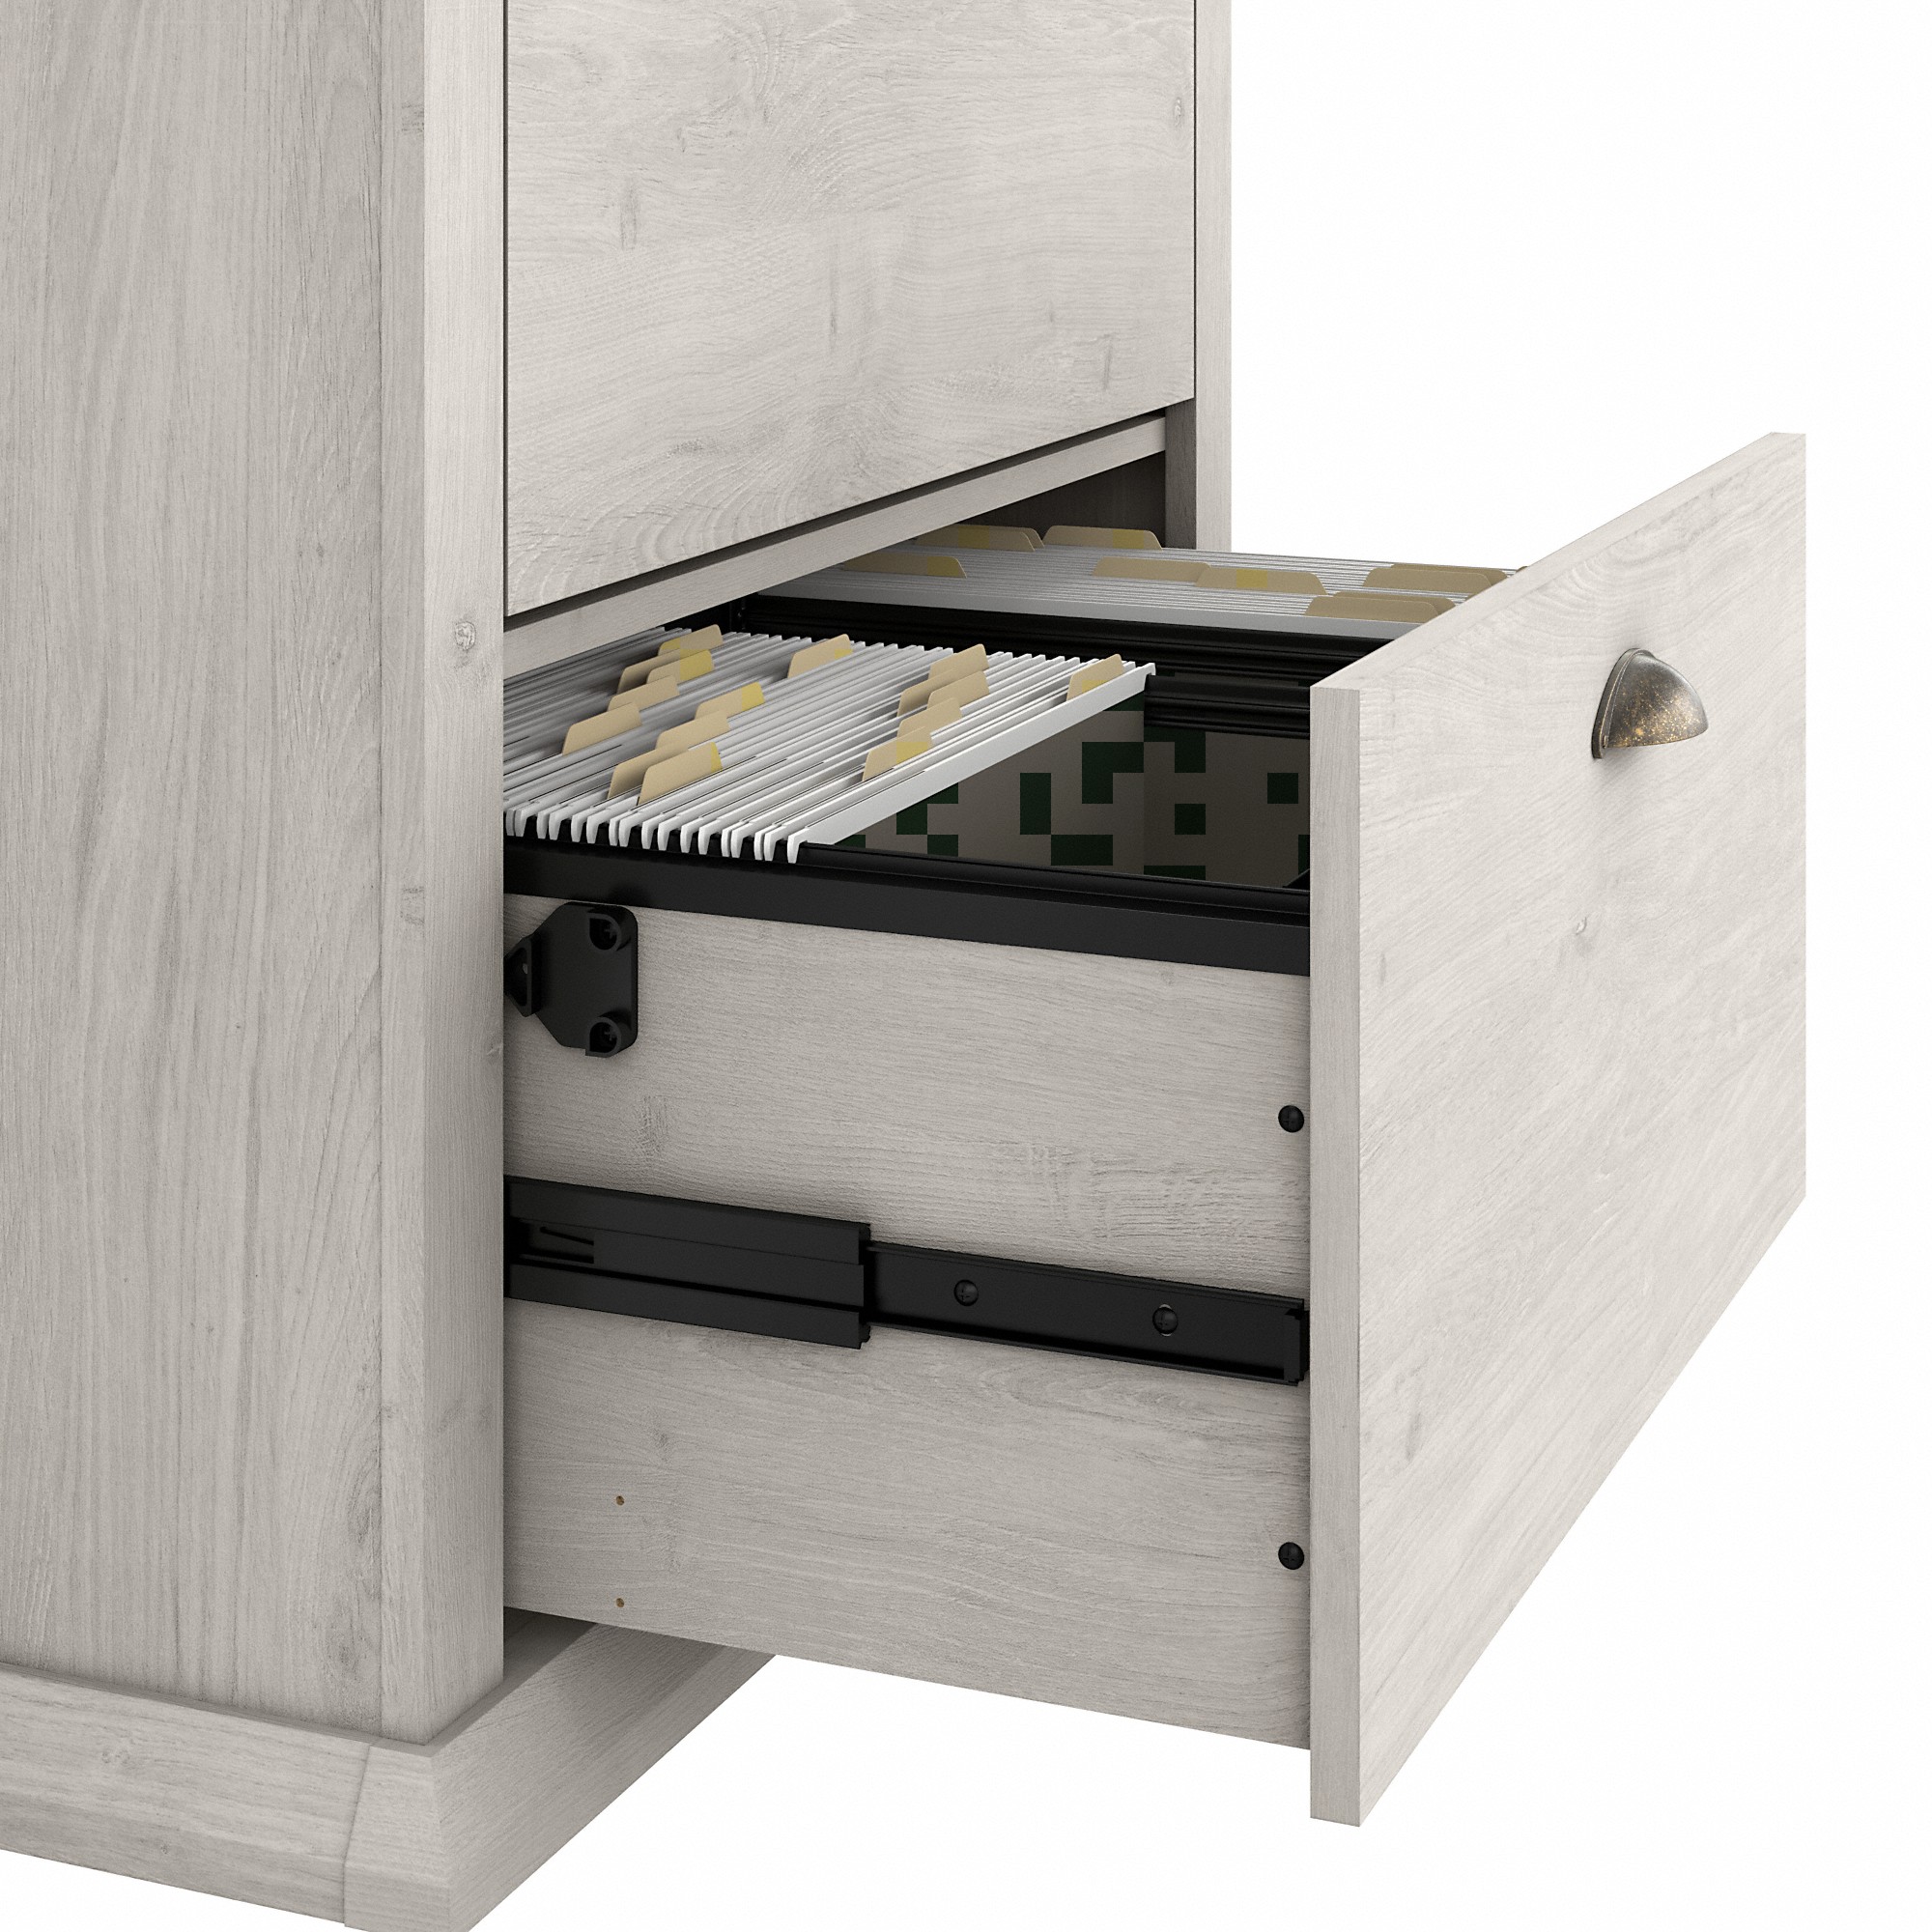 Yorktown 2 Drawer Lateral File Cabinet in Linen White Oak - image 4 of 7